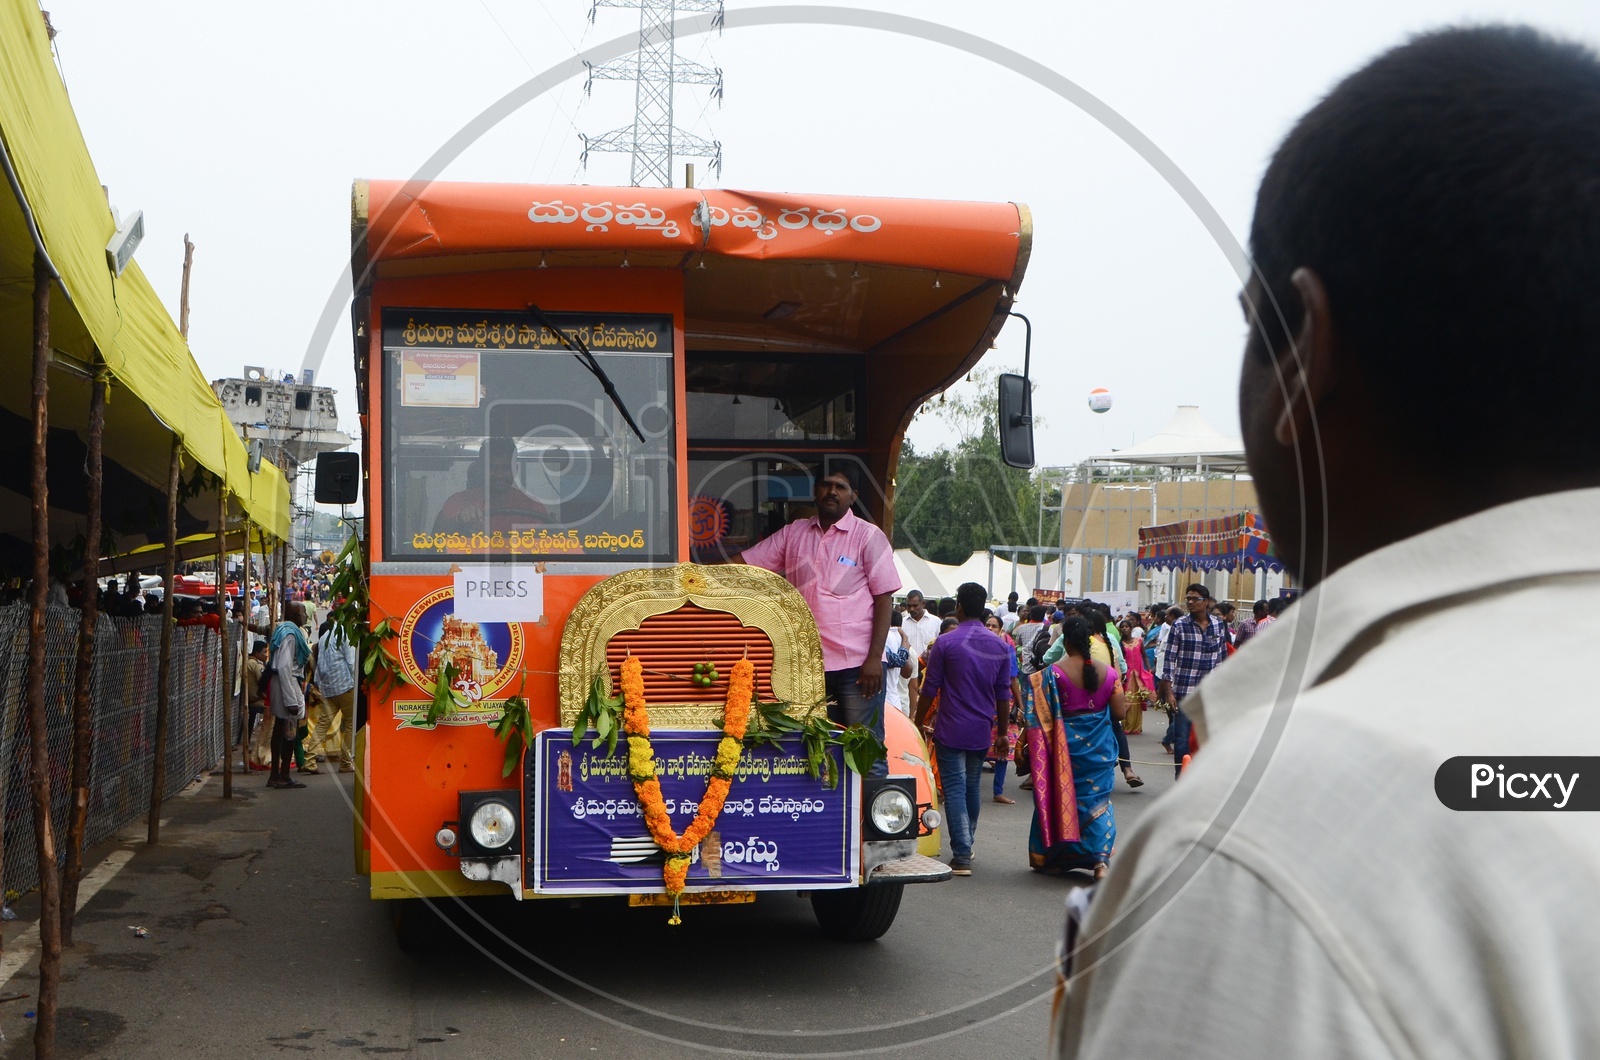 Free Service of Bus to Durga Temple